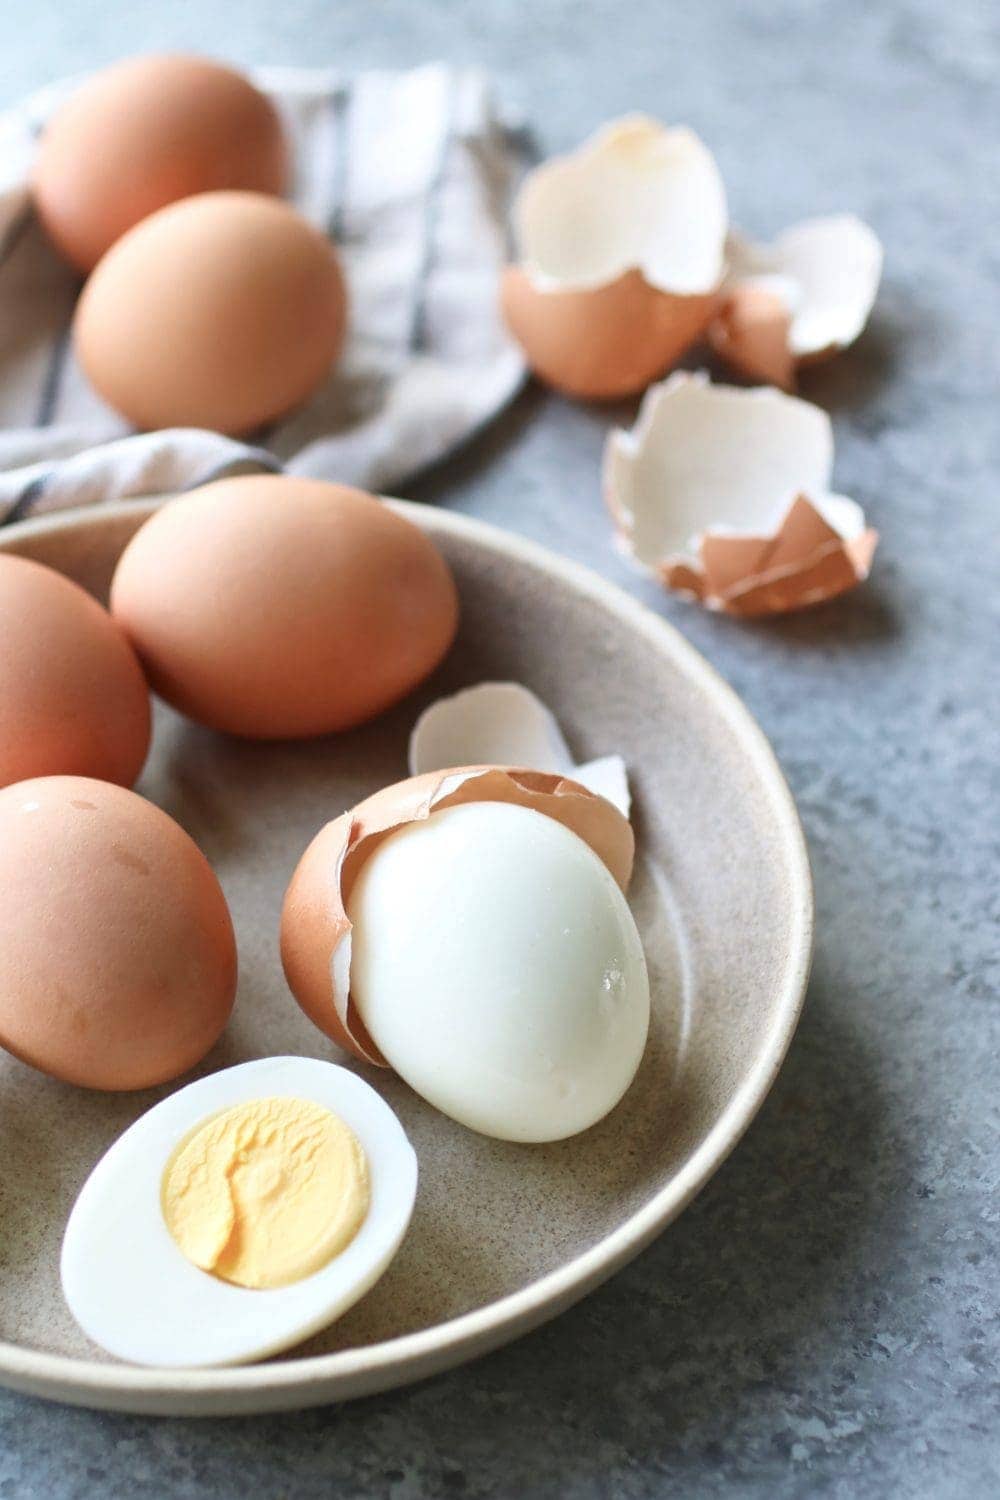 How To Make Easy Peel Hard Boiled Eggs The Real Food Dietitians